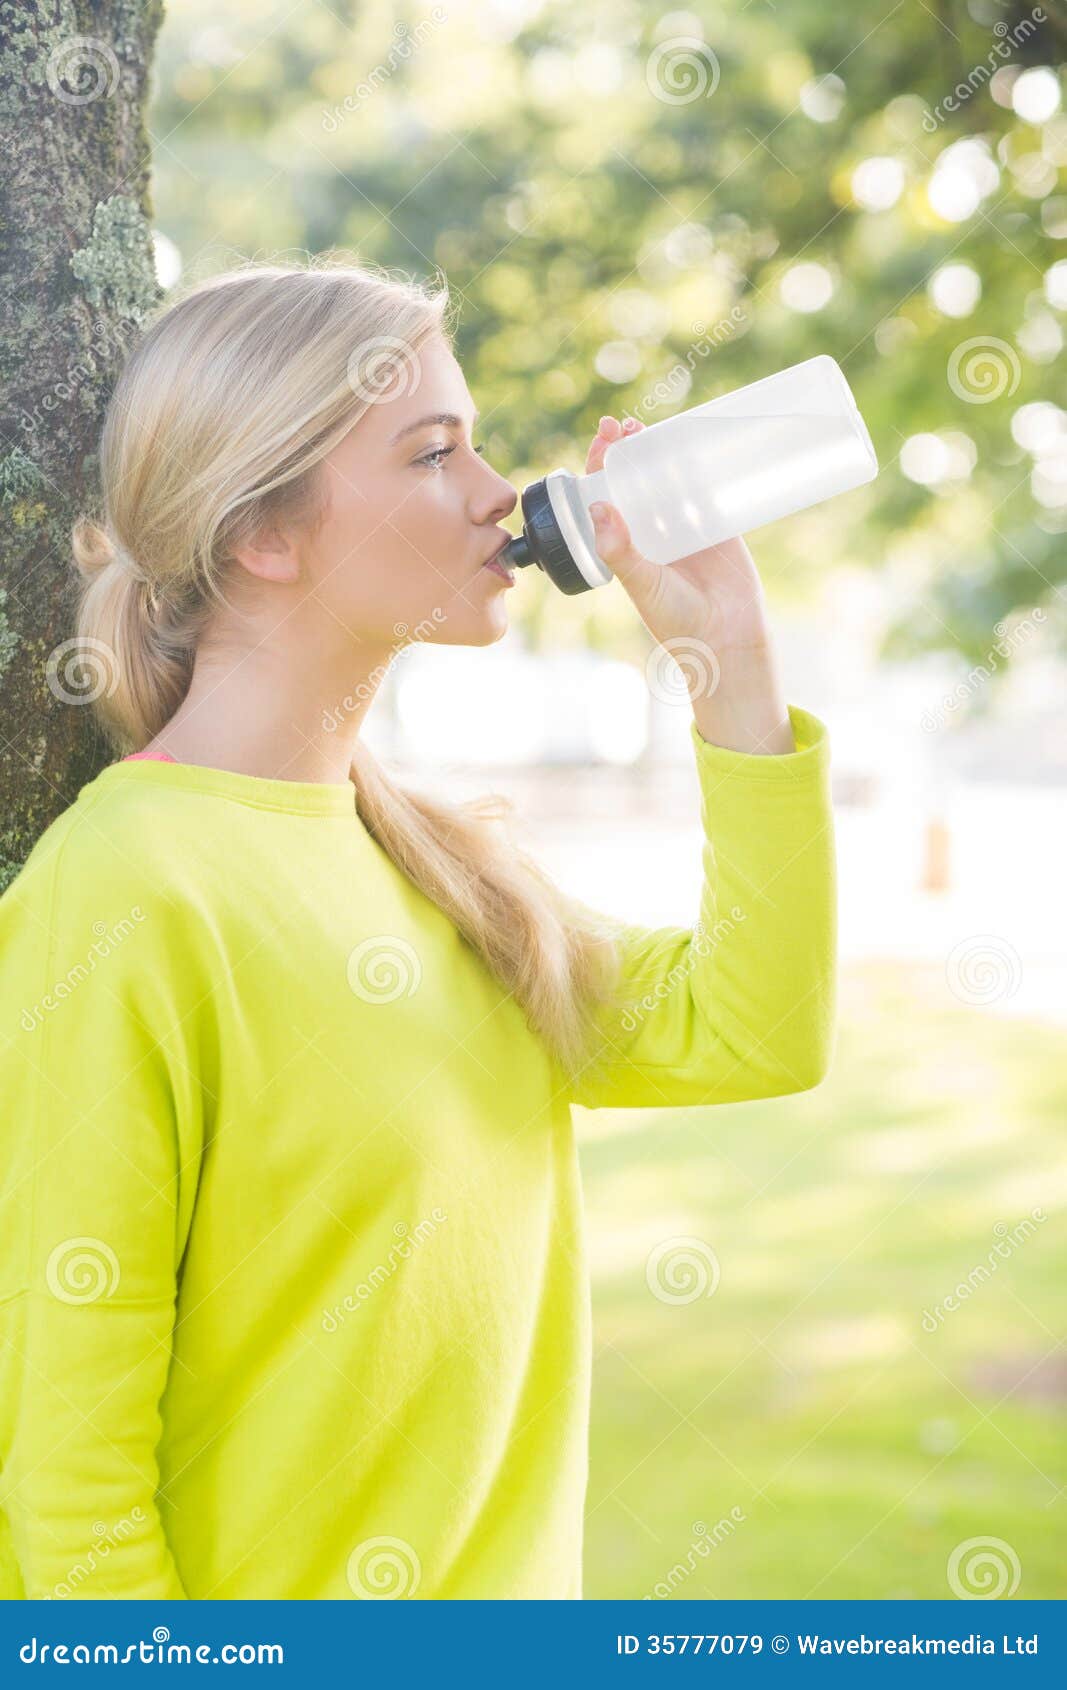 Fit Calm Blonde Drinking From Water Bottle Stock Image Image Of Long Caucasian 35777079 